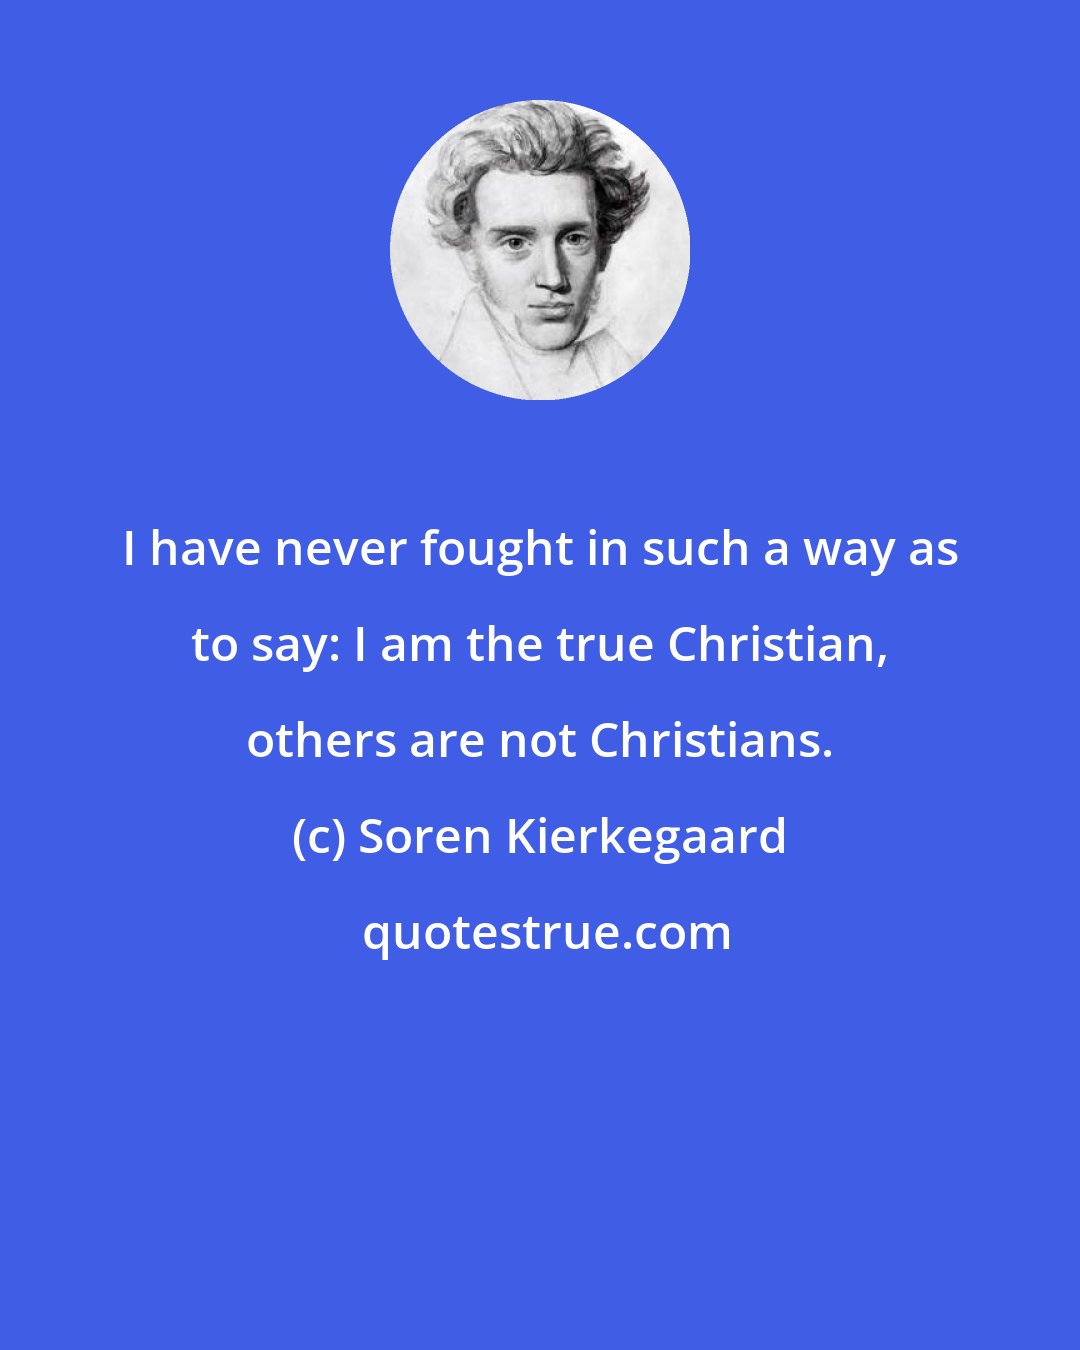 Soren Kierkegaard: I have never fought in such a way as to say: I am the true Christian, others are not Christians.